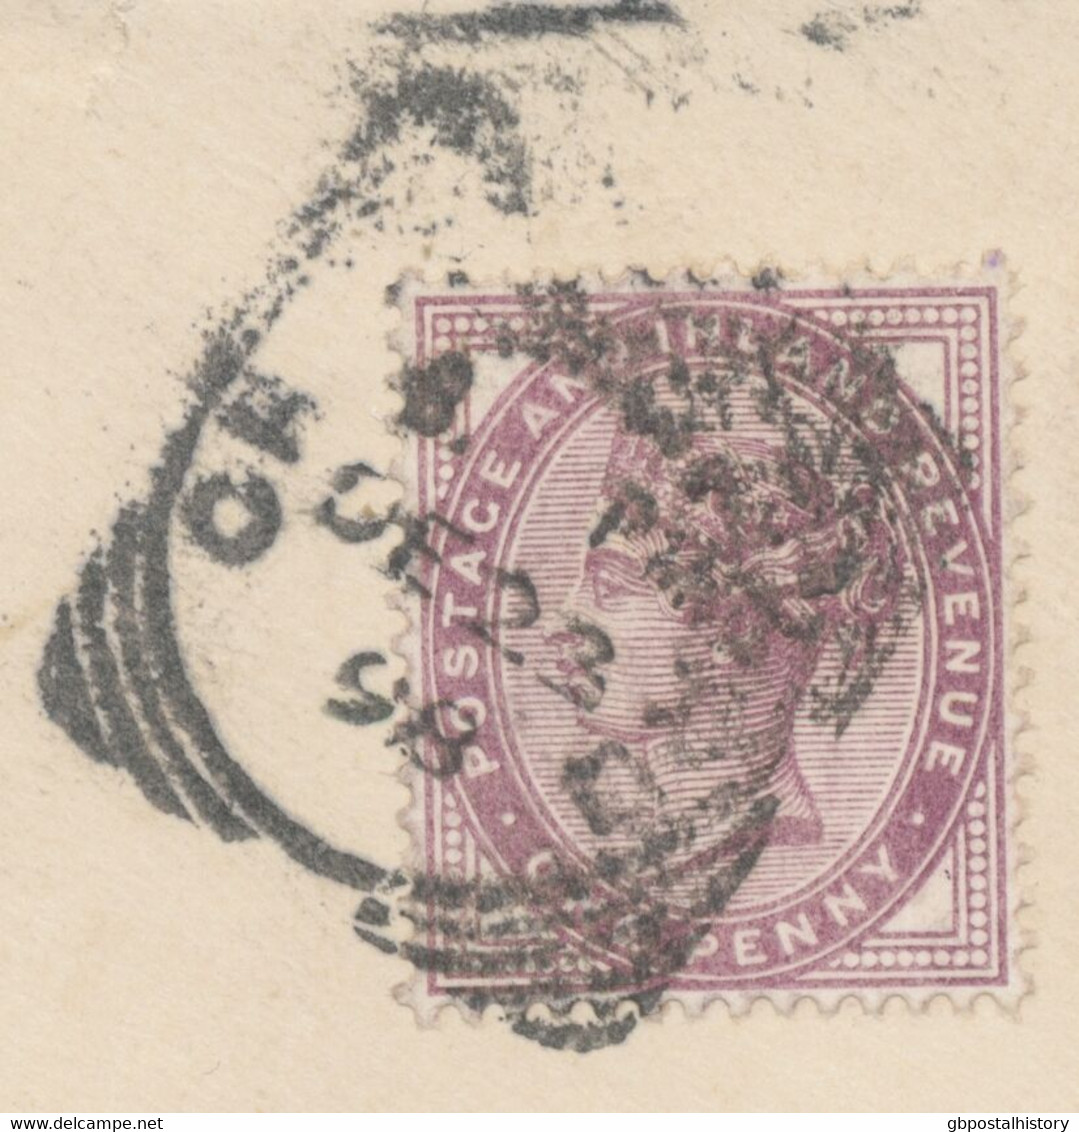 GB „CHELMSFORD“ Squared Circle Postmark (Cohen Typ 1st I CT) 1 D Lilac VARIETY - Errors, Freaks & Oddities (EFOs